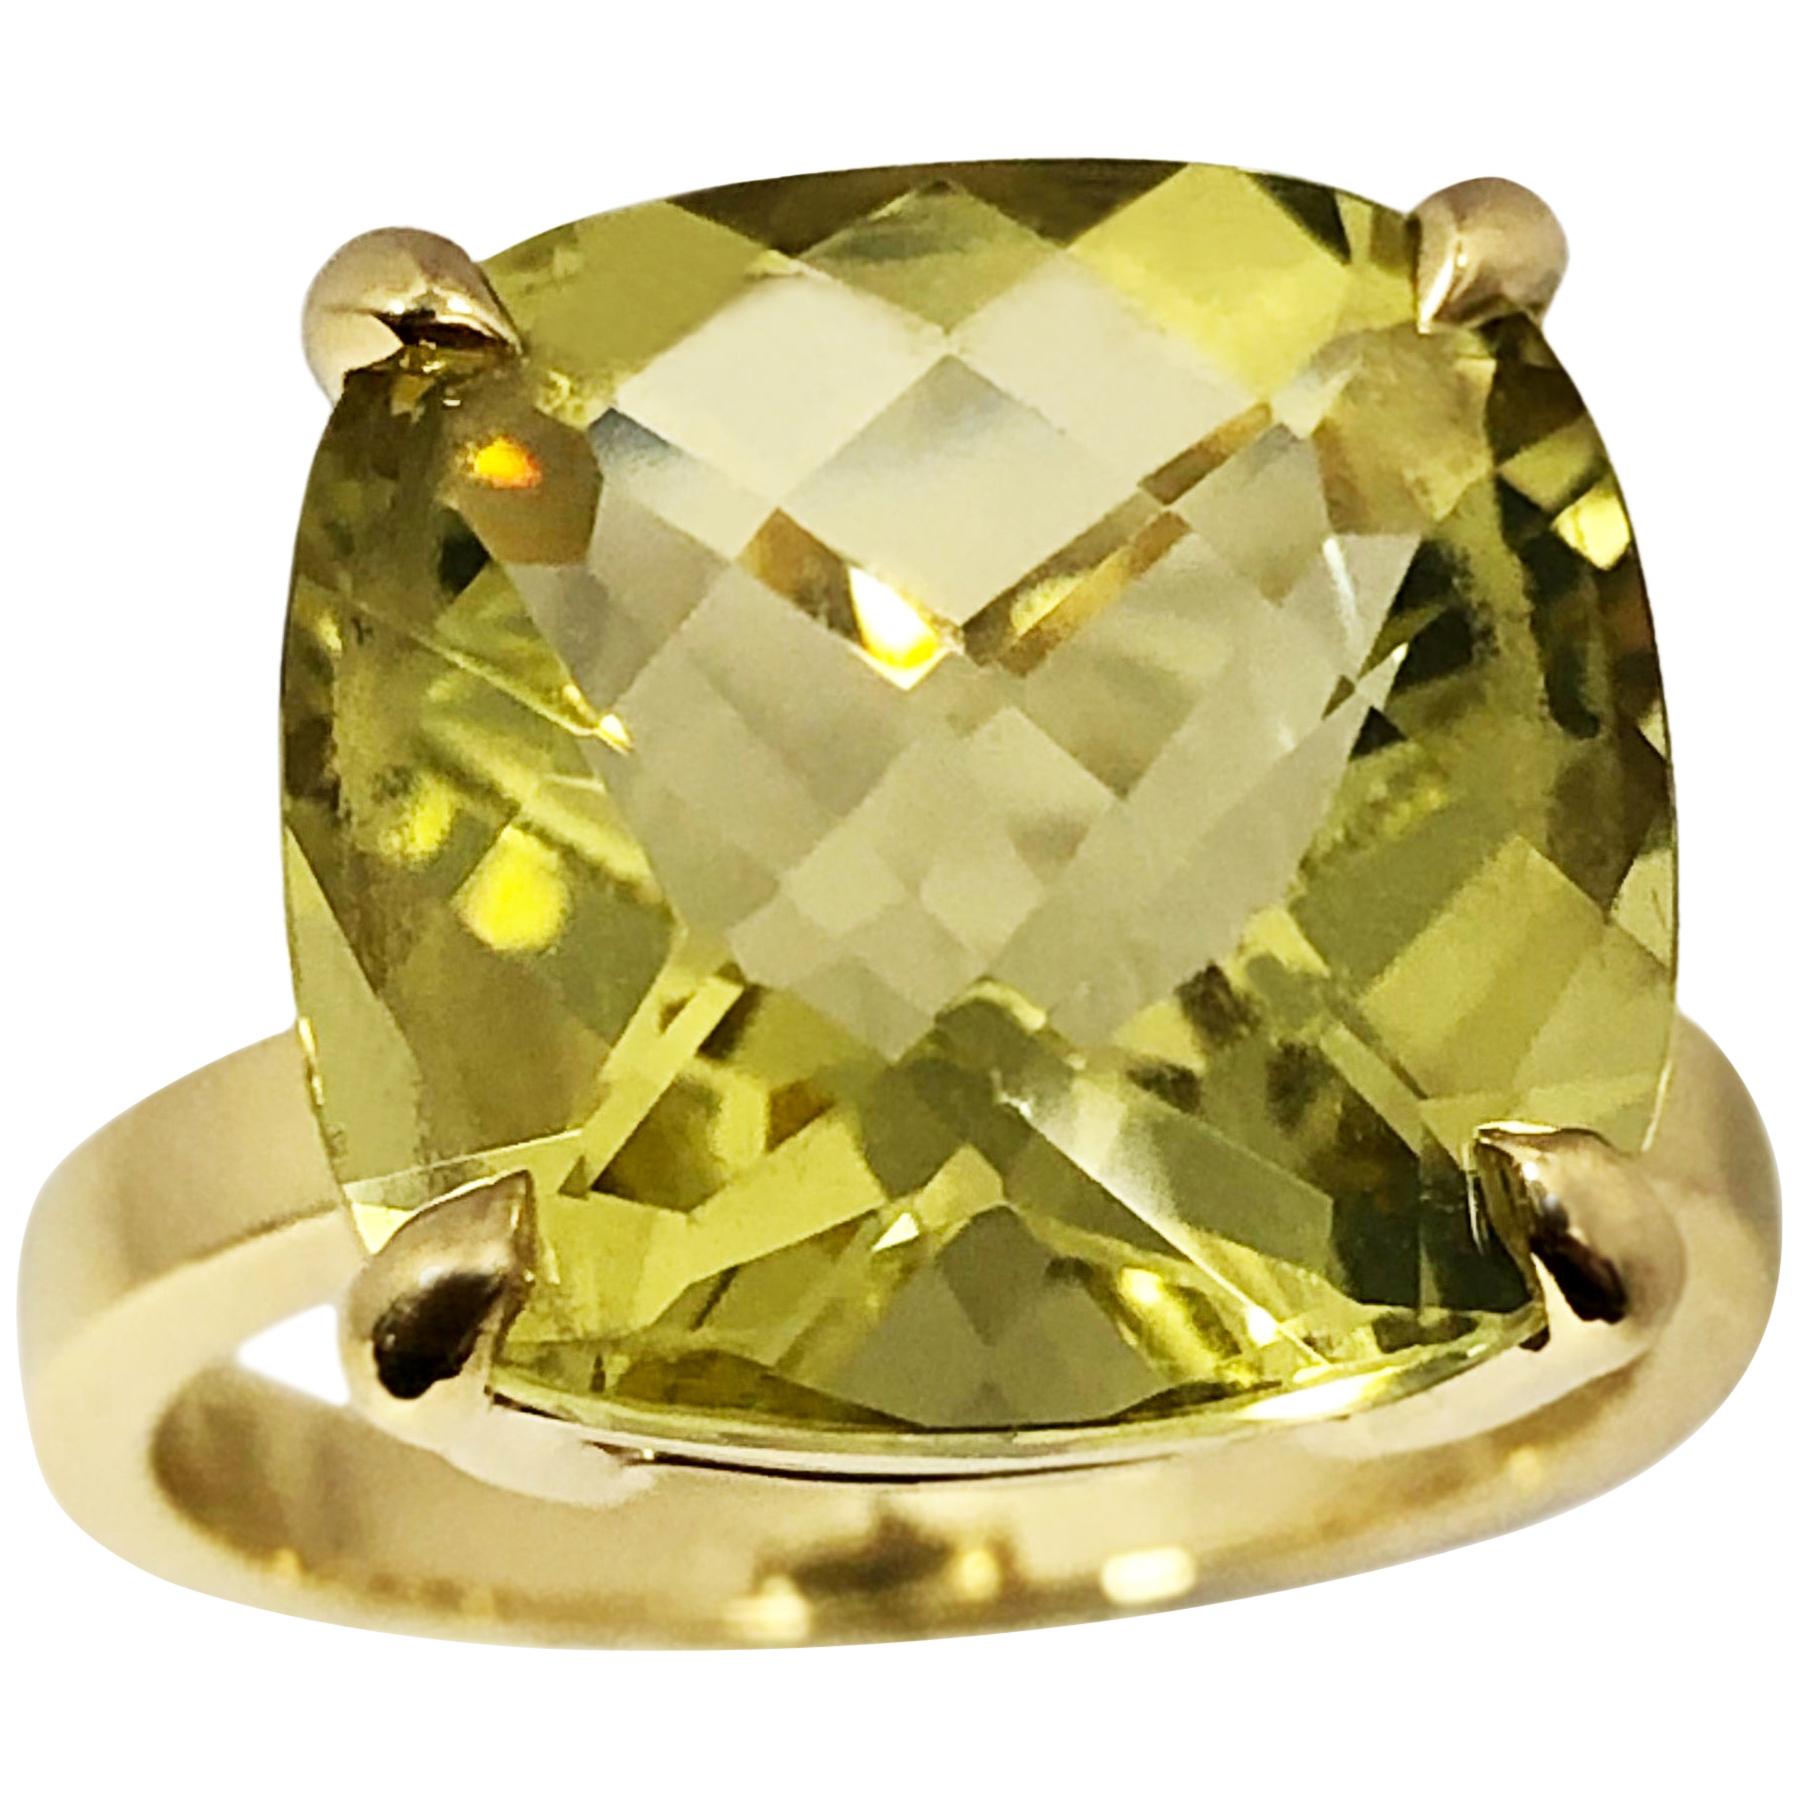 Tiffany & Co. Yellow Gold and Cushion Citrine Ring